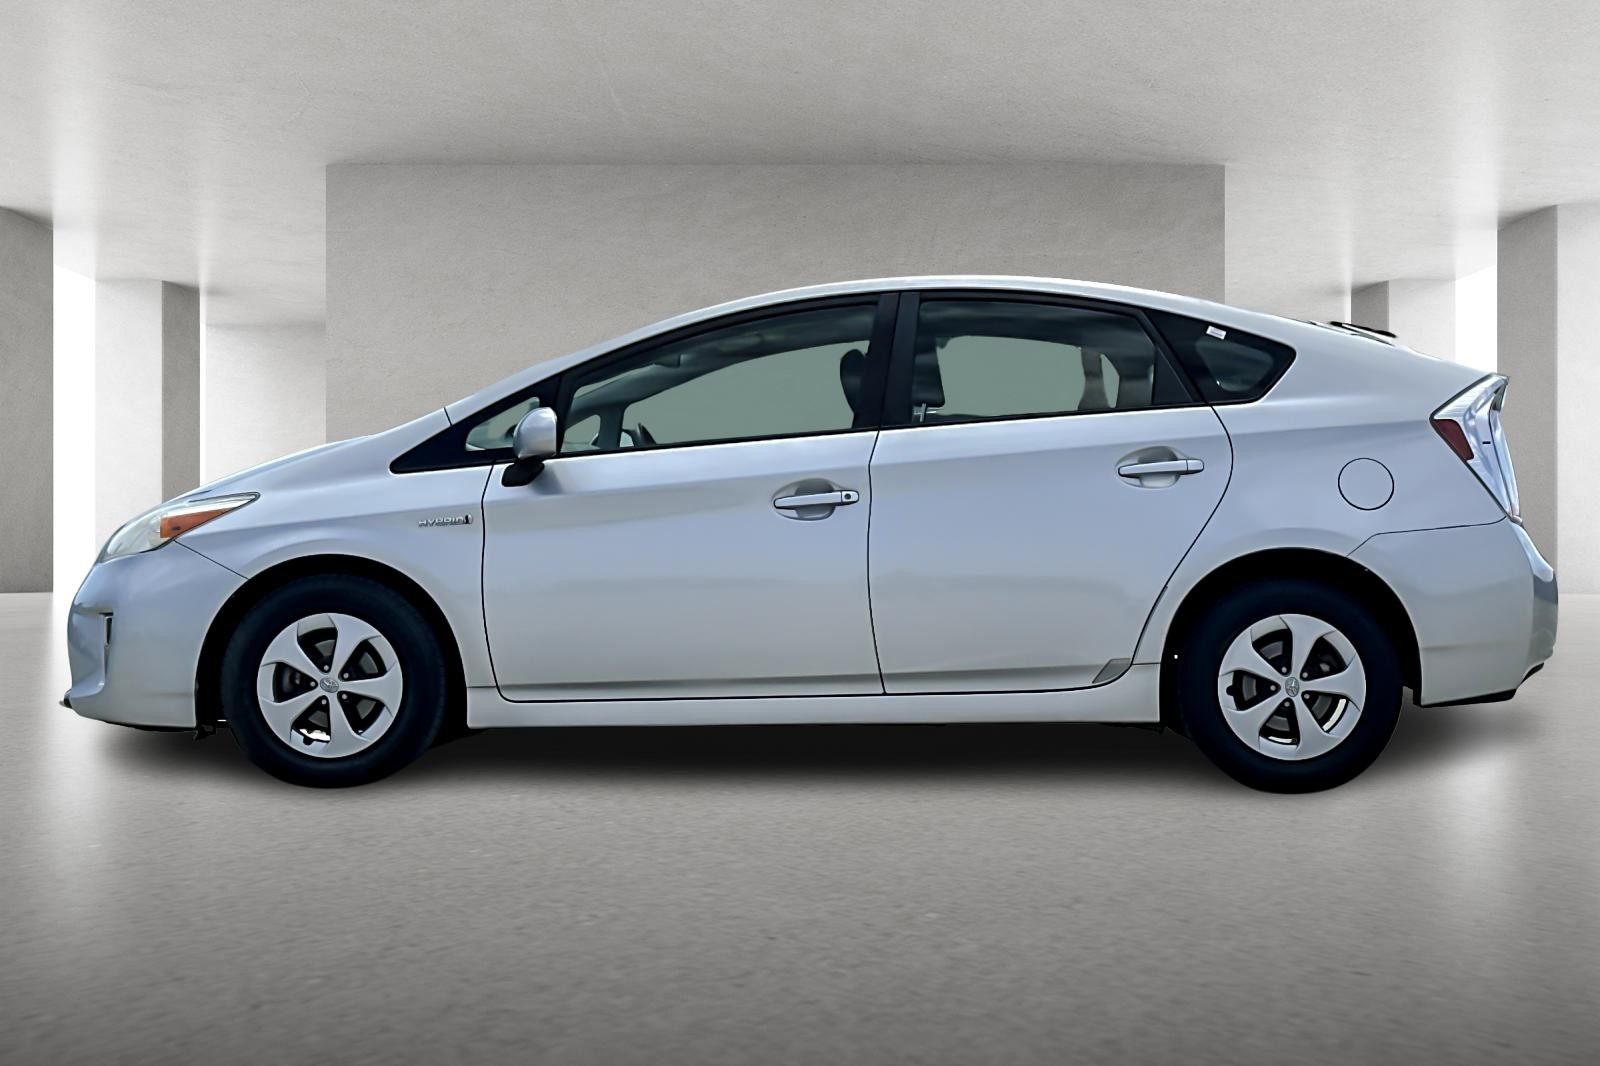 Pre-Owned 2013 Toyota Prius Two Sedan in Carson #AN1003102 